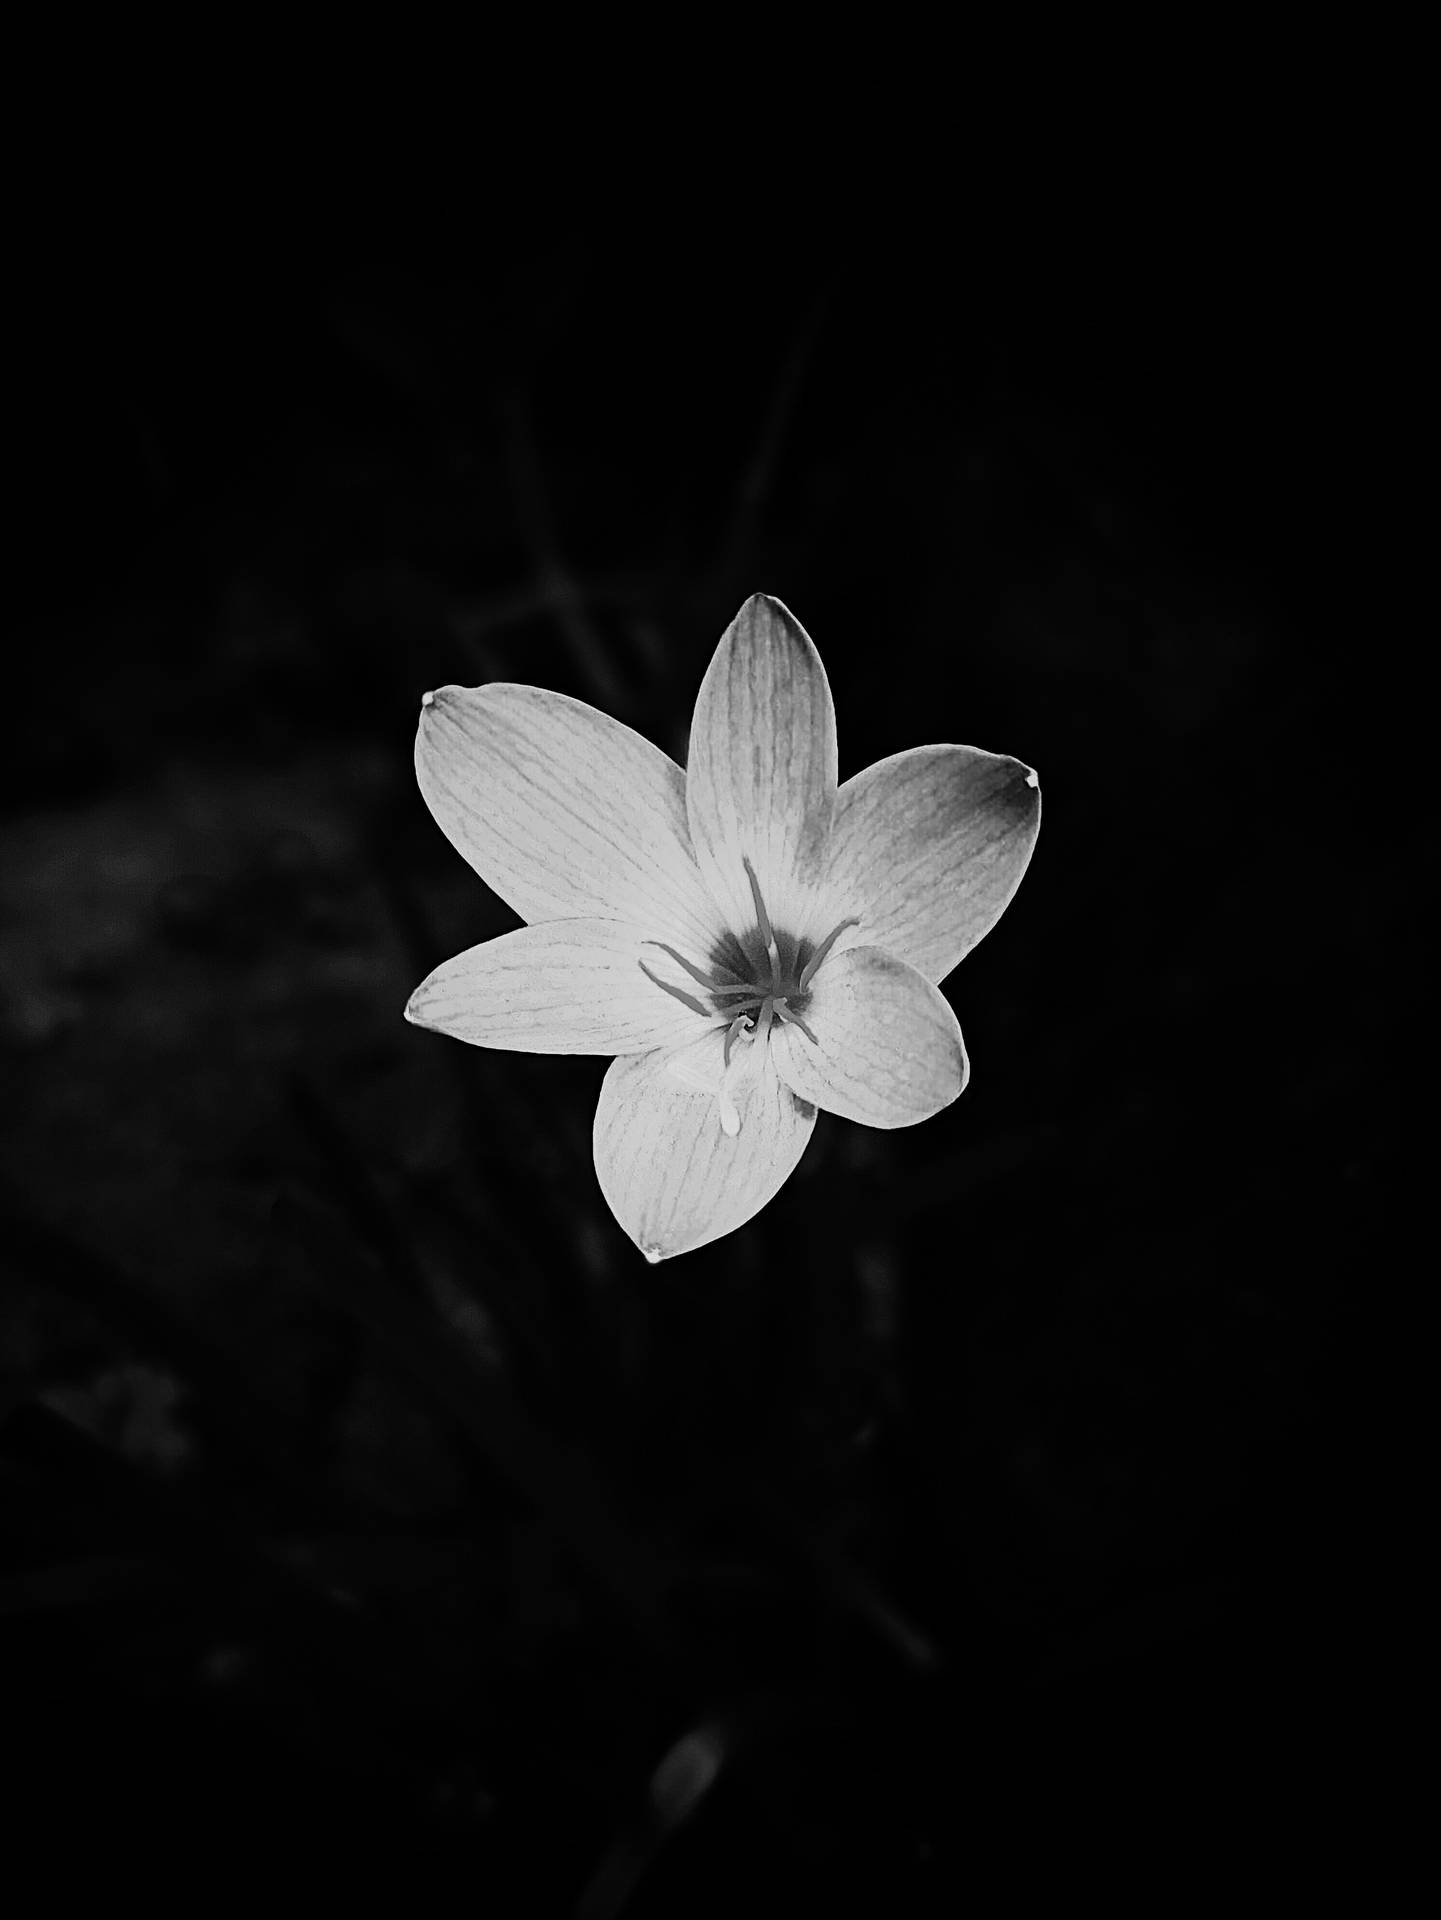 The beauty of a single flower in black and white Wallpaper